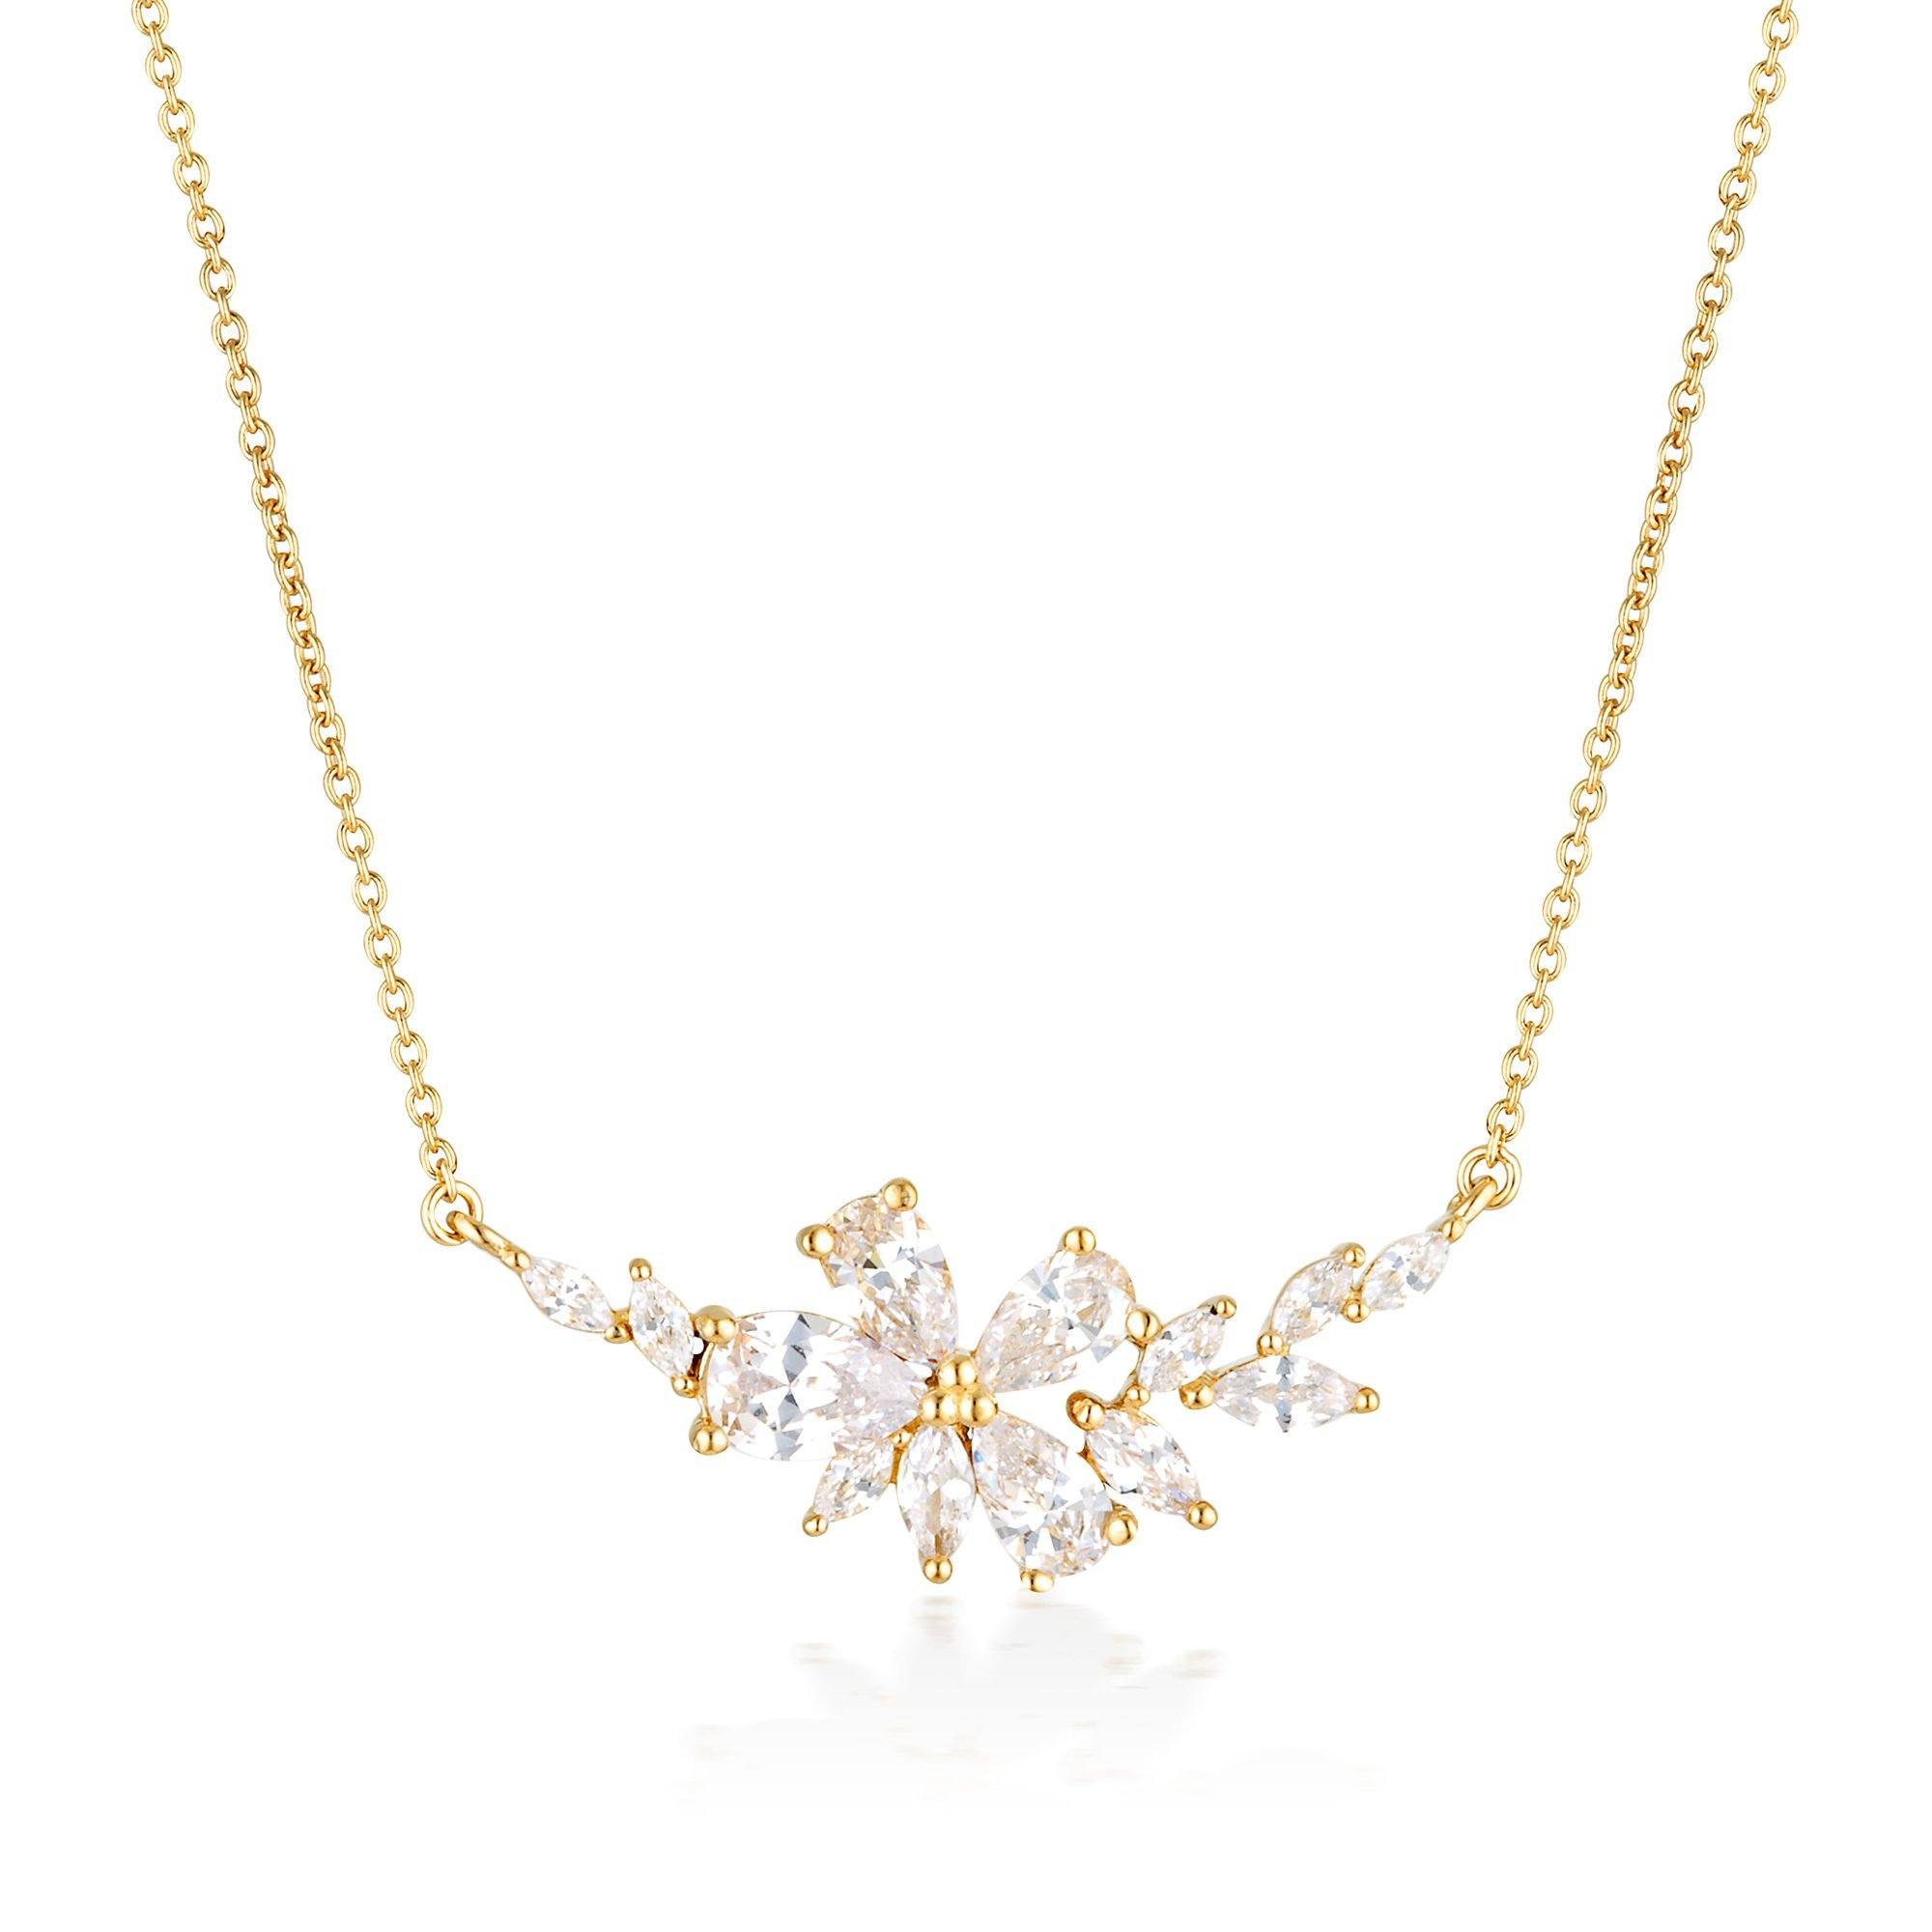 GEORGINI ICONIC BRIDAL HYACINTH NECKLACE GOLD Bevilles Jewellers 